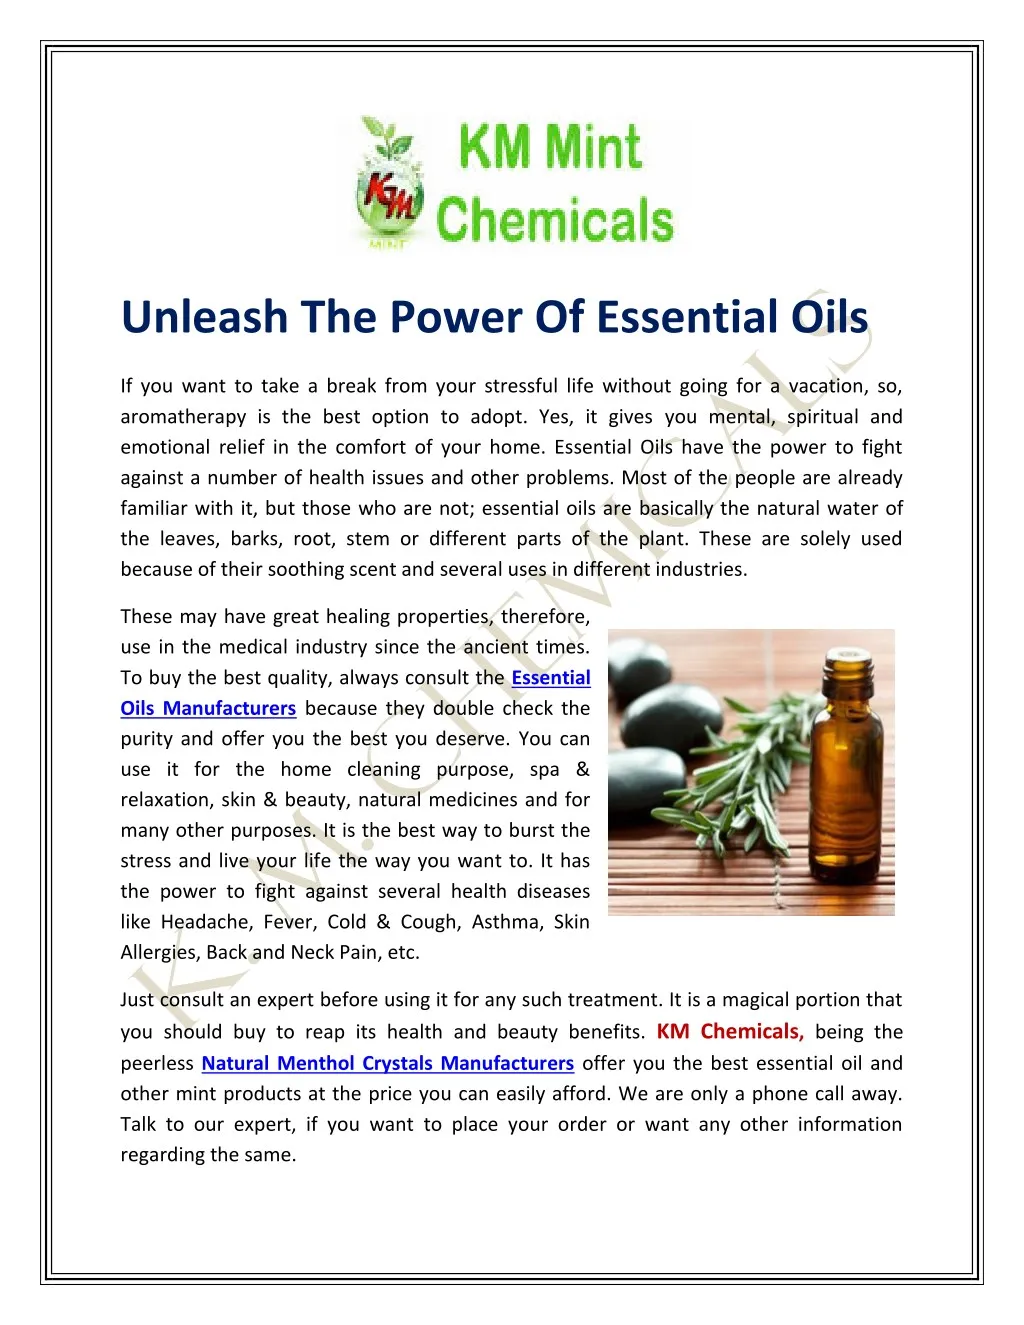 unleash the power of essential oils